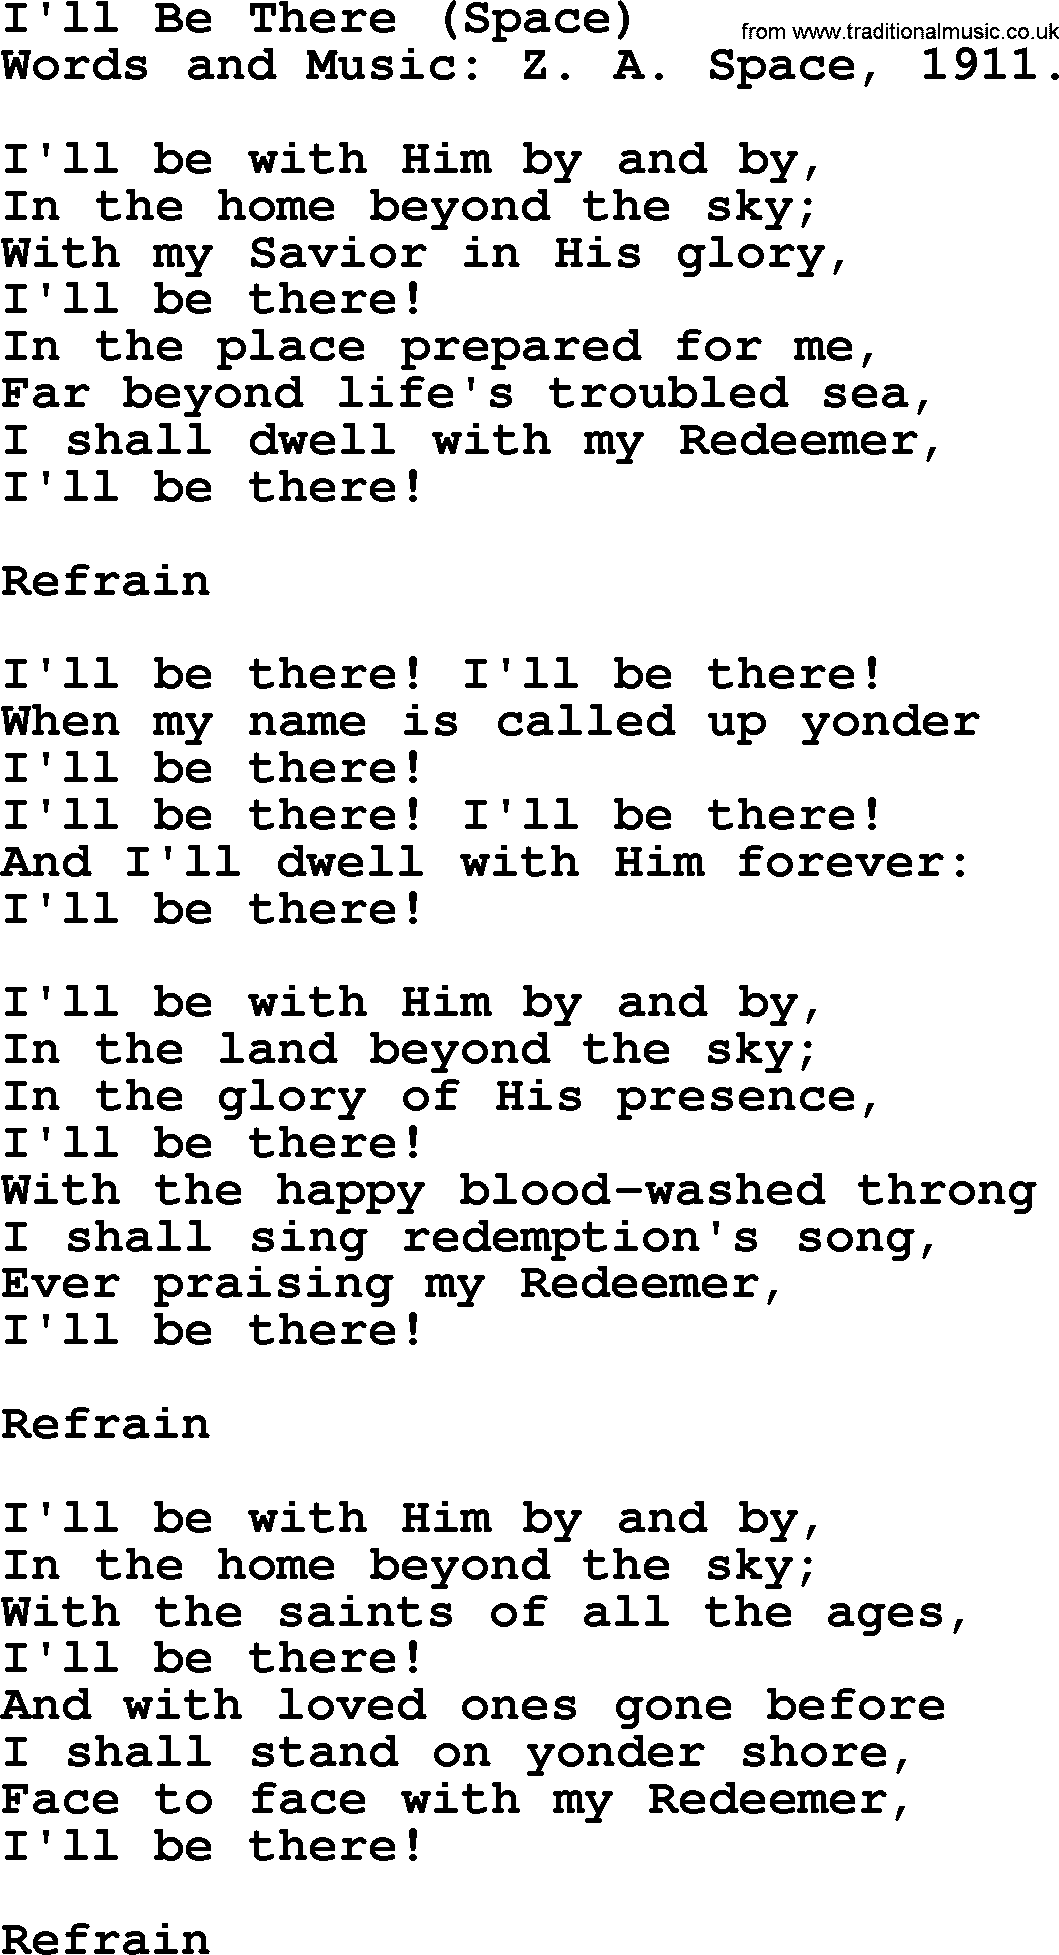 Songs and Hymns about Heaven: I'll Be There (space) lyrics with PDF